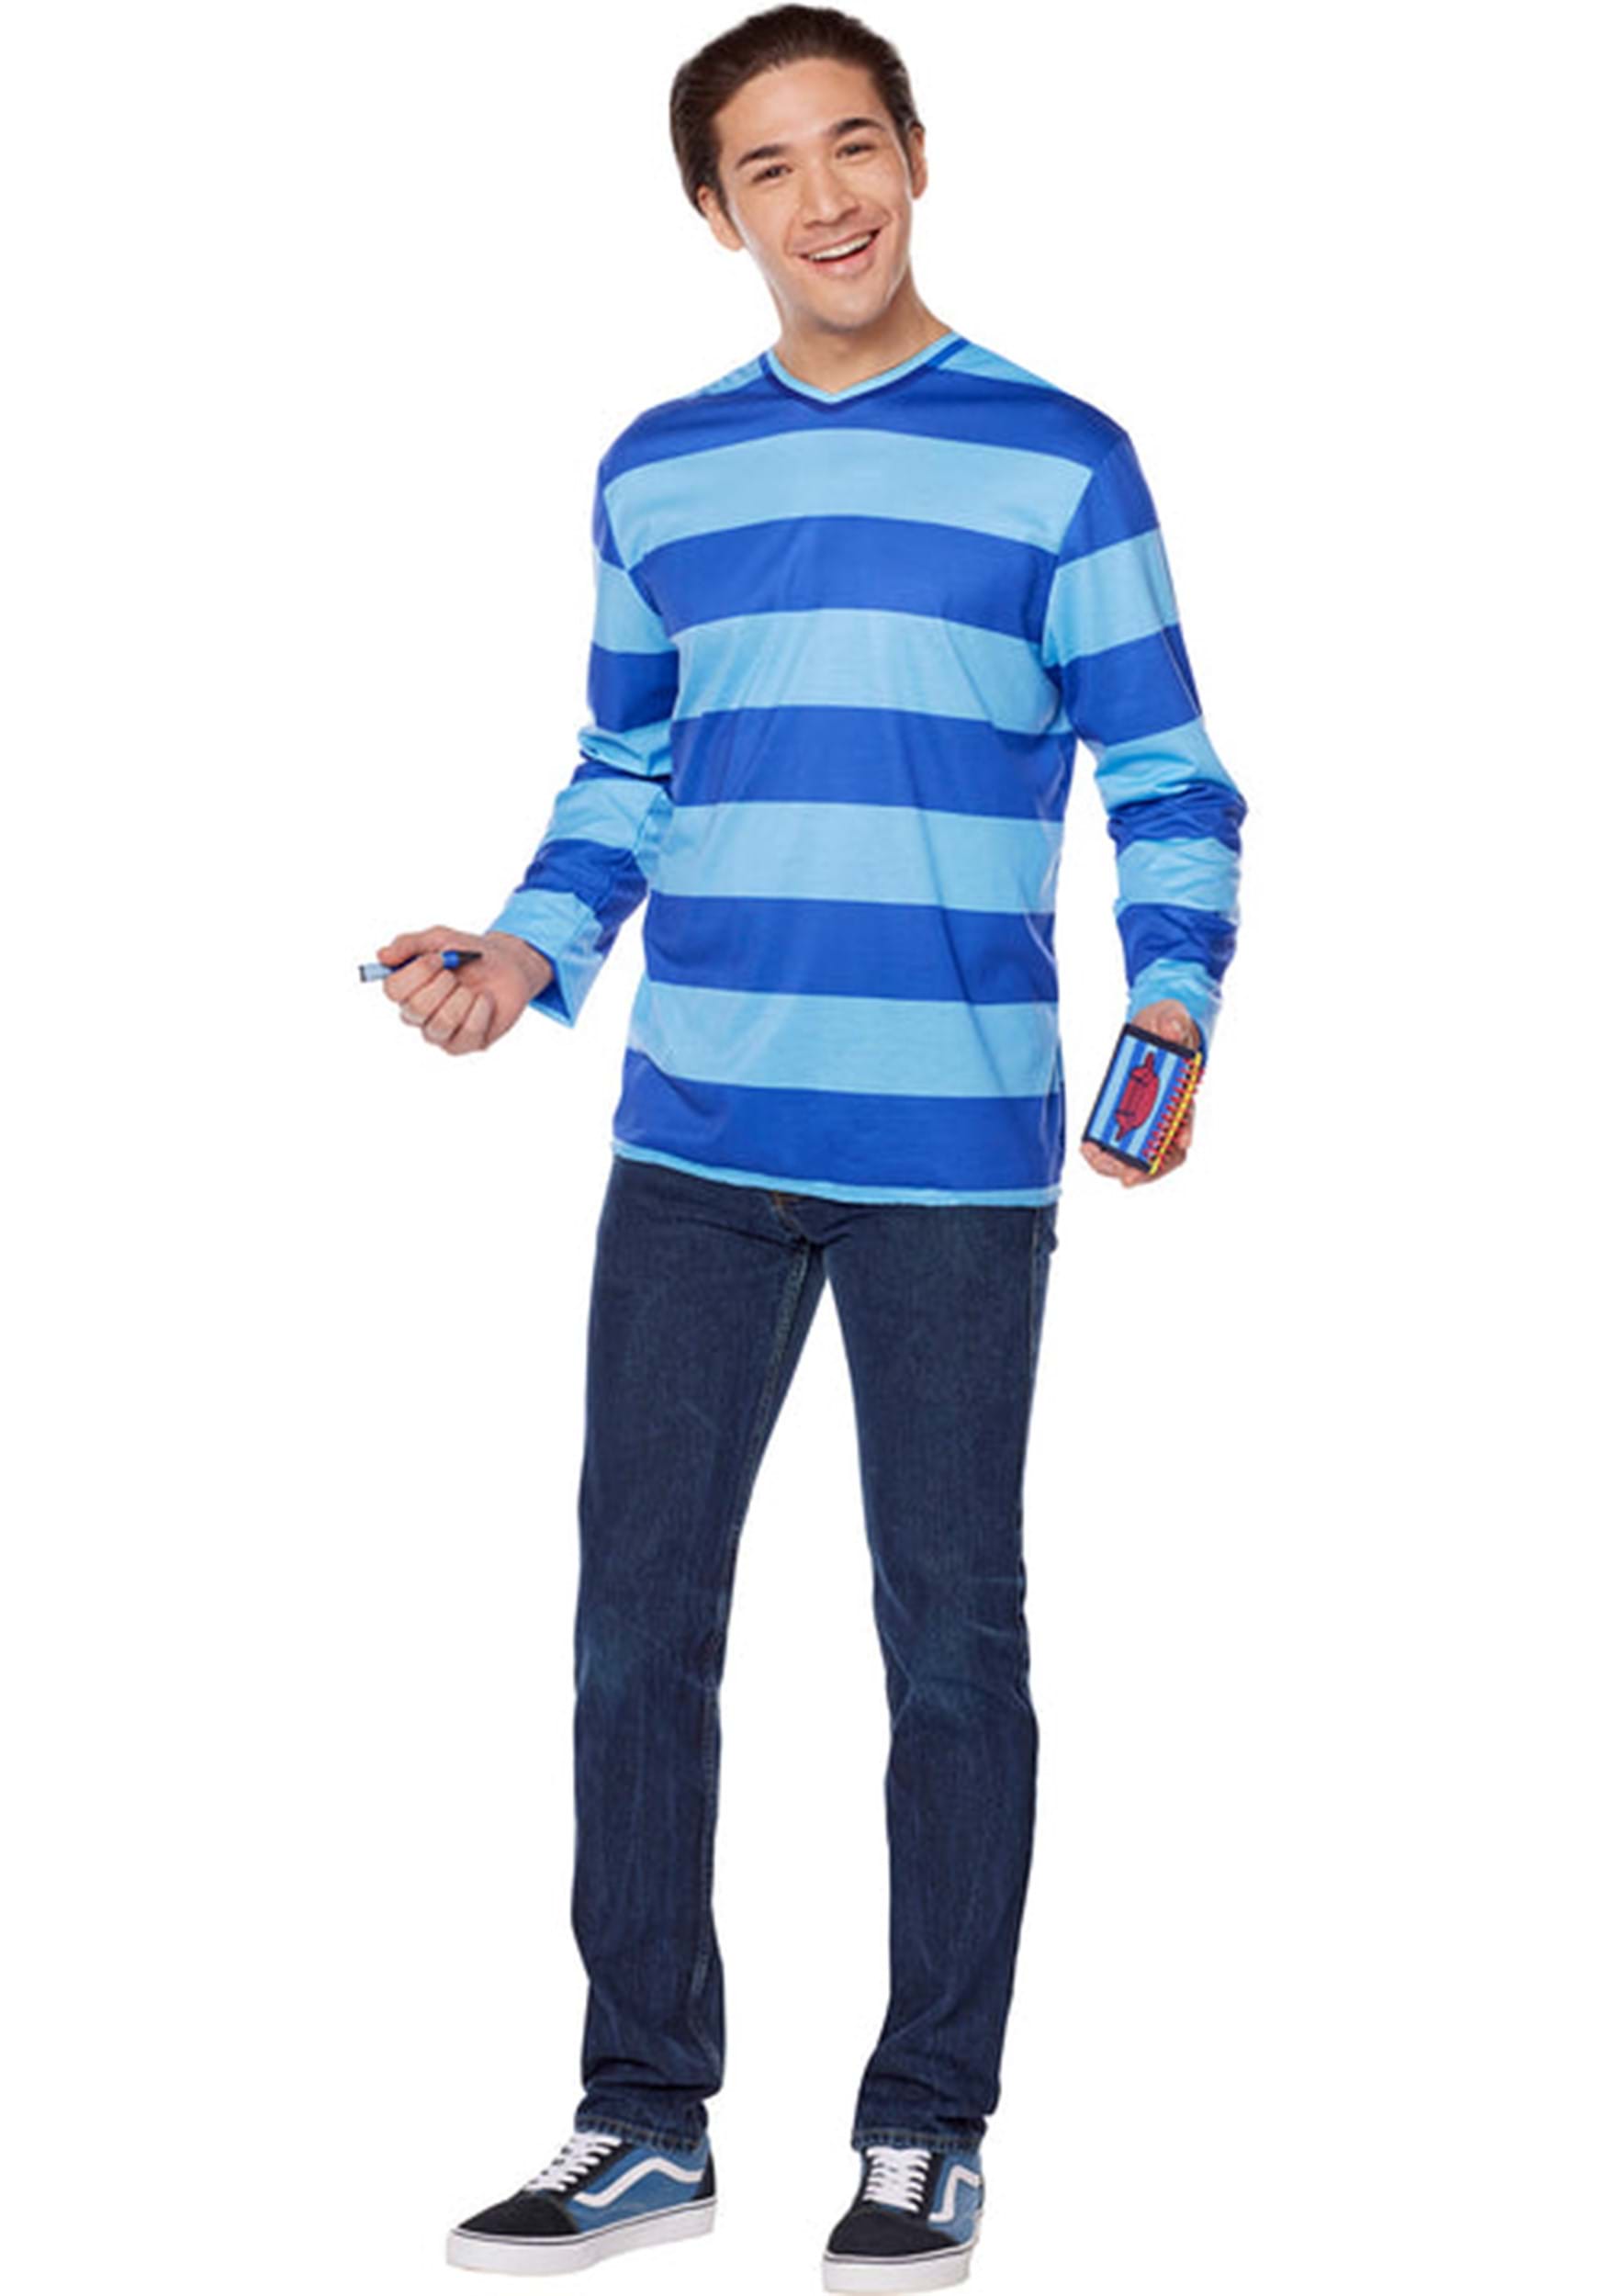 Blue's Clues Josh Costume For Adults